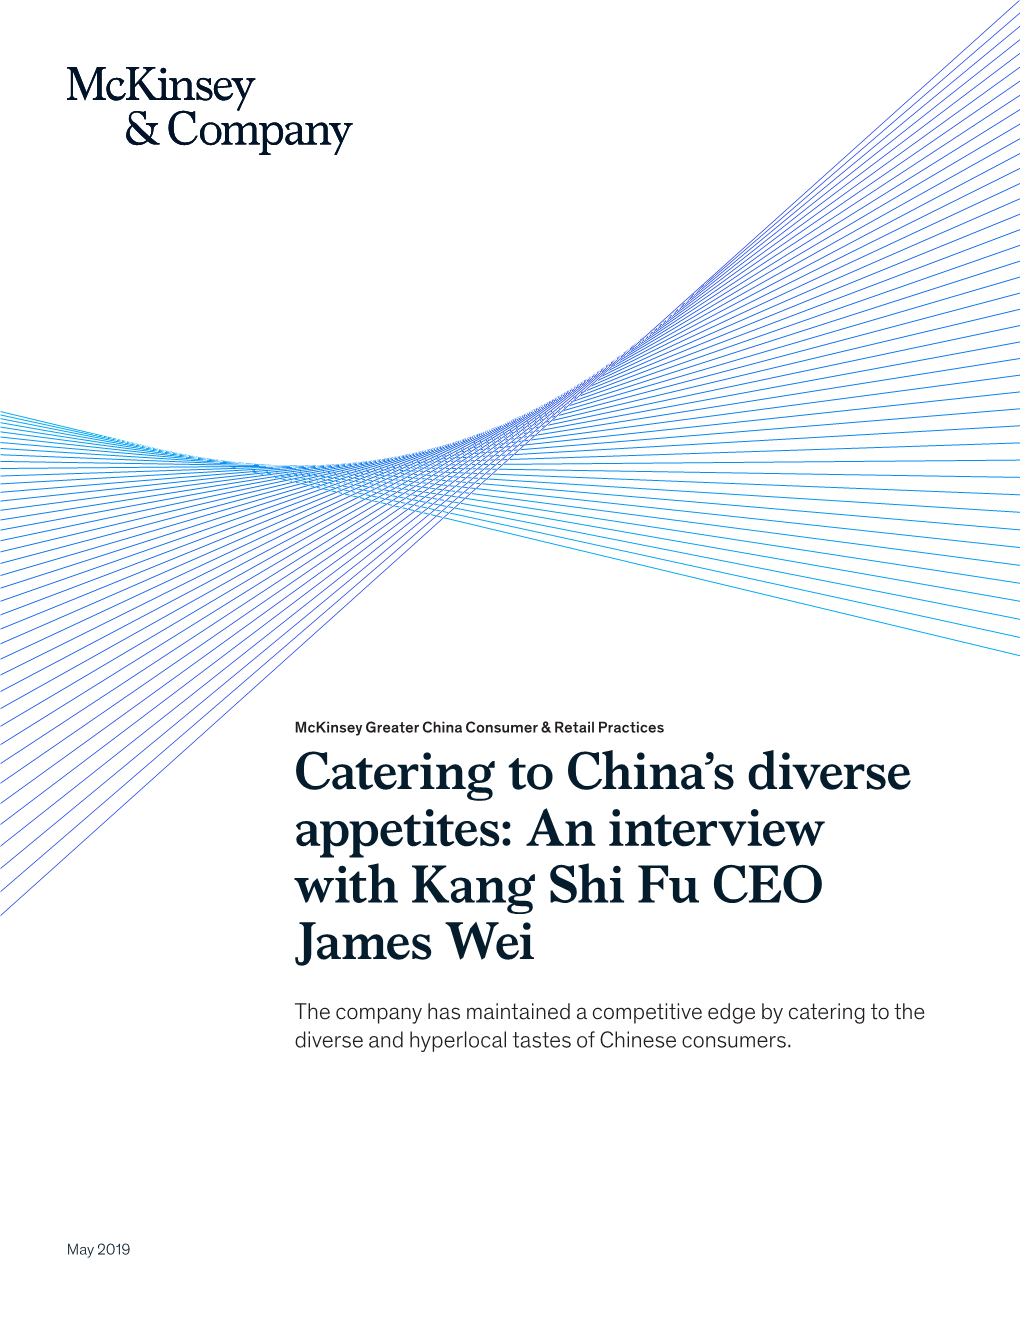 An Interview with Kang Shi Fu CEO James Wei